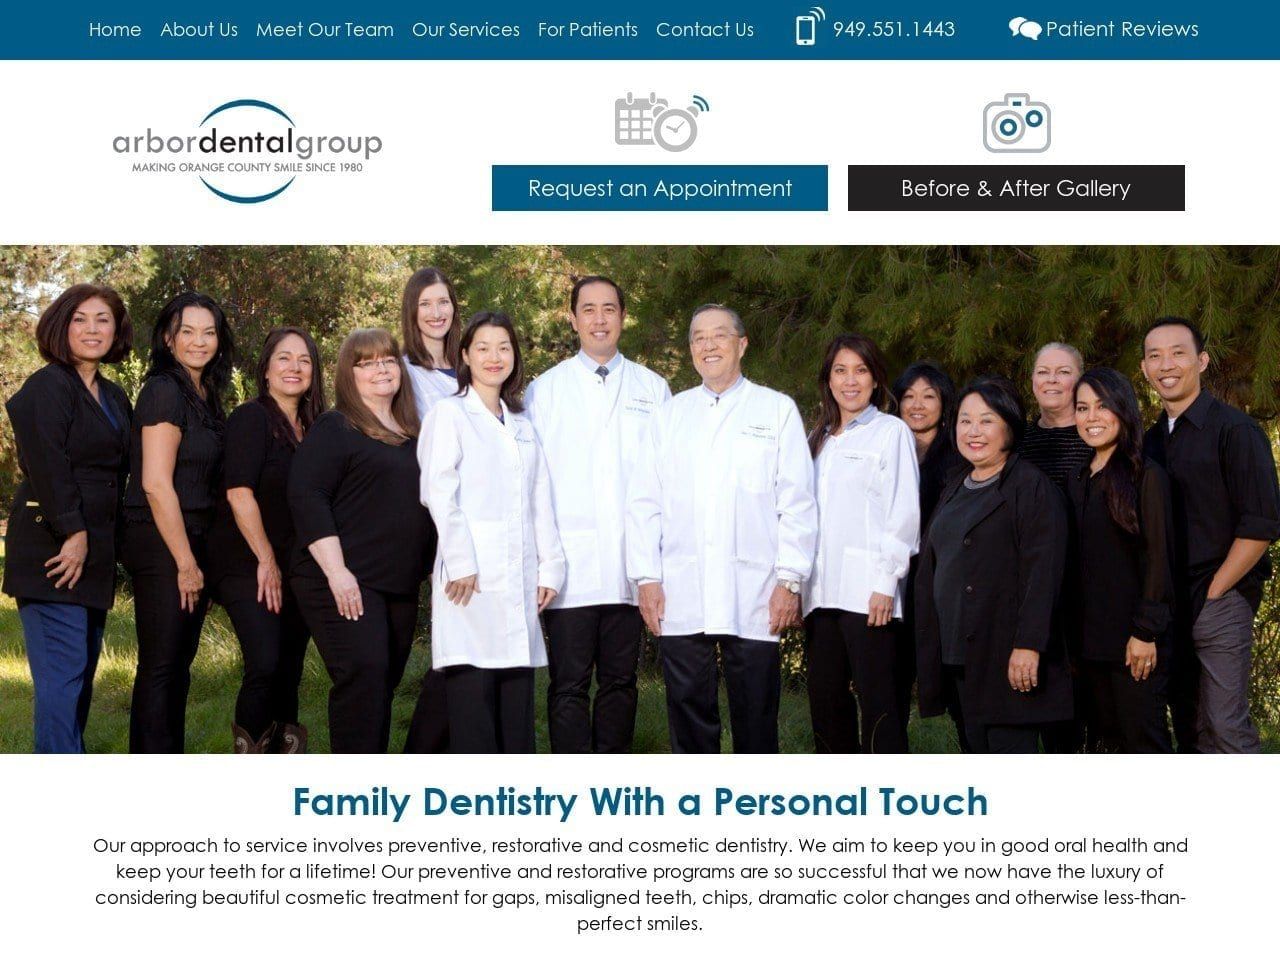 The Arbor Dental Group Website Screenshot from thearbordentalgroup.com